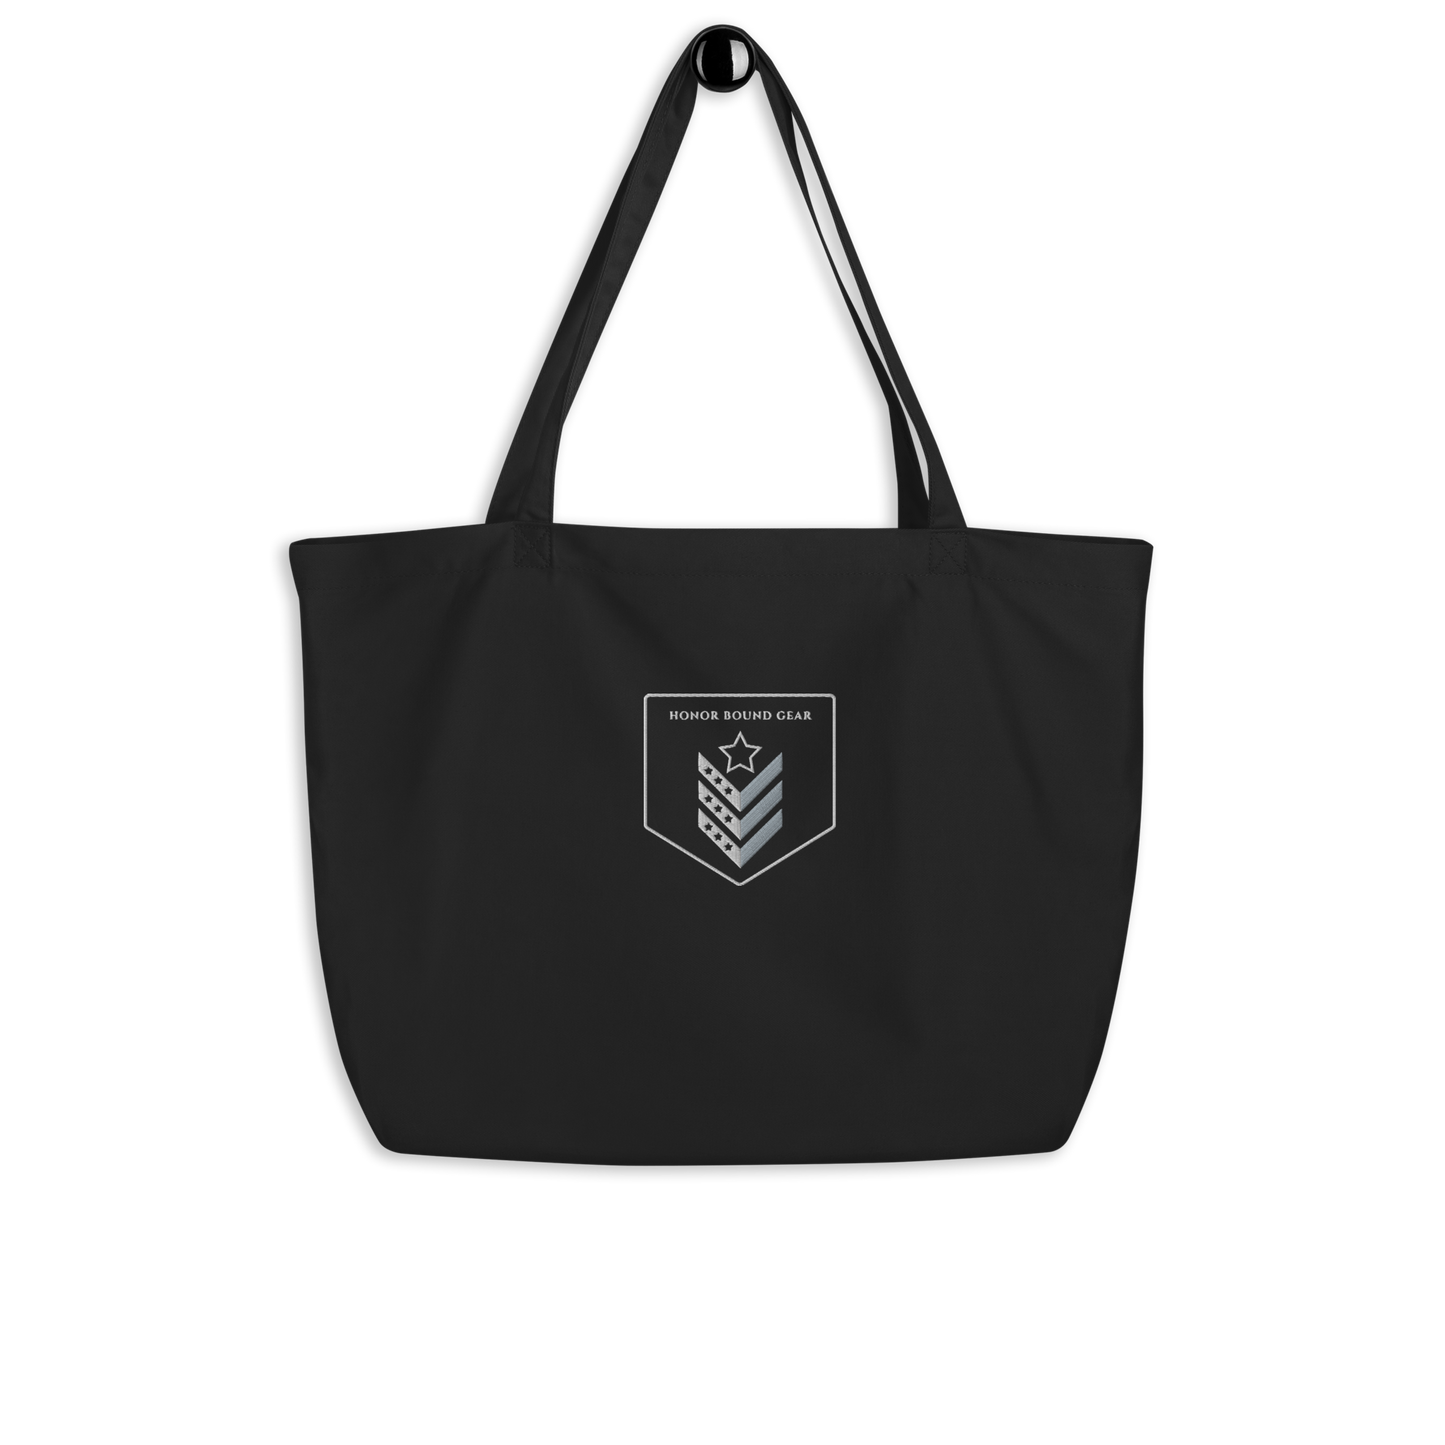 Honor Bound Gear Large Tote Bag